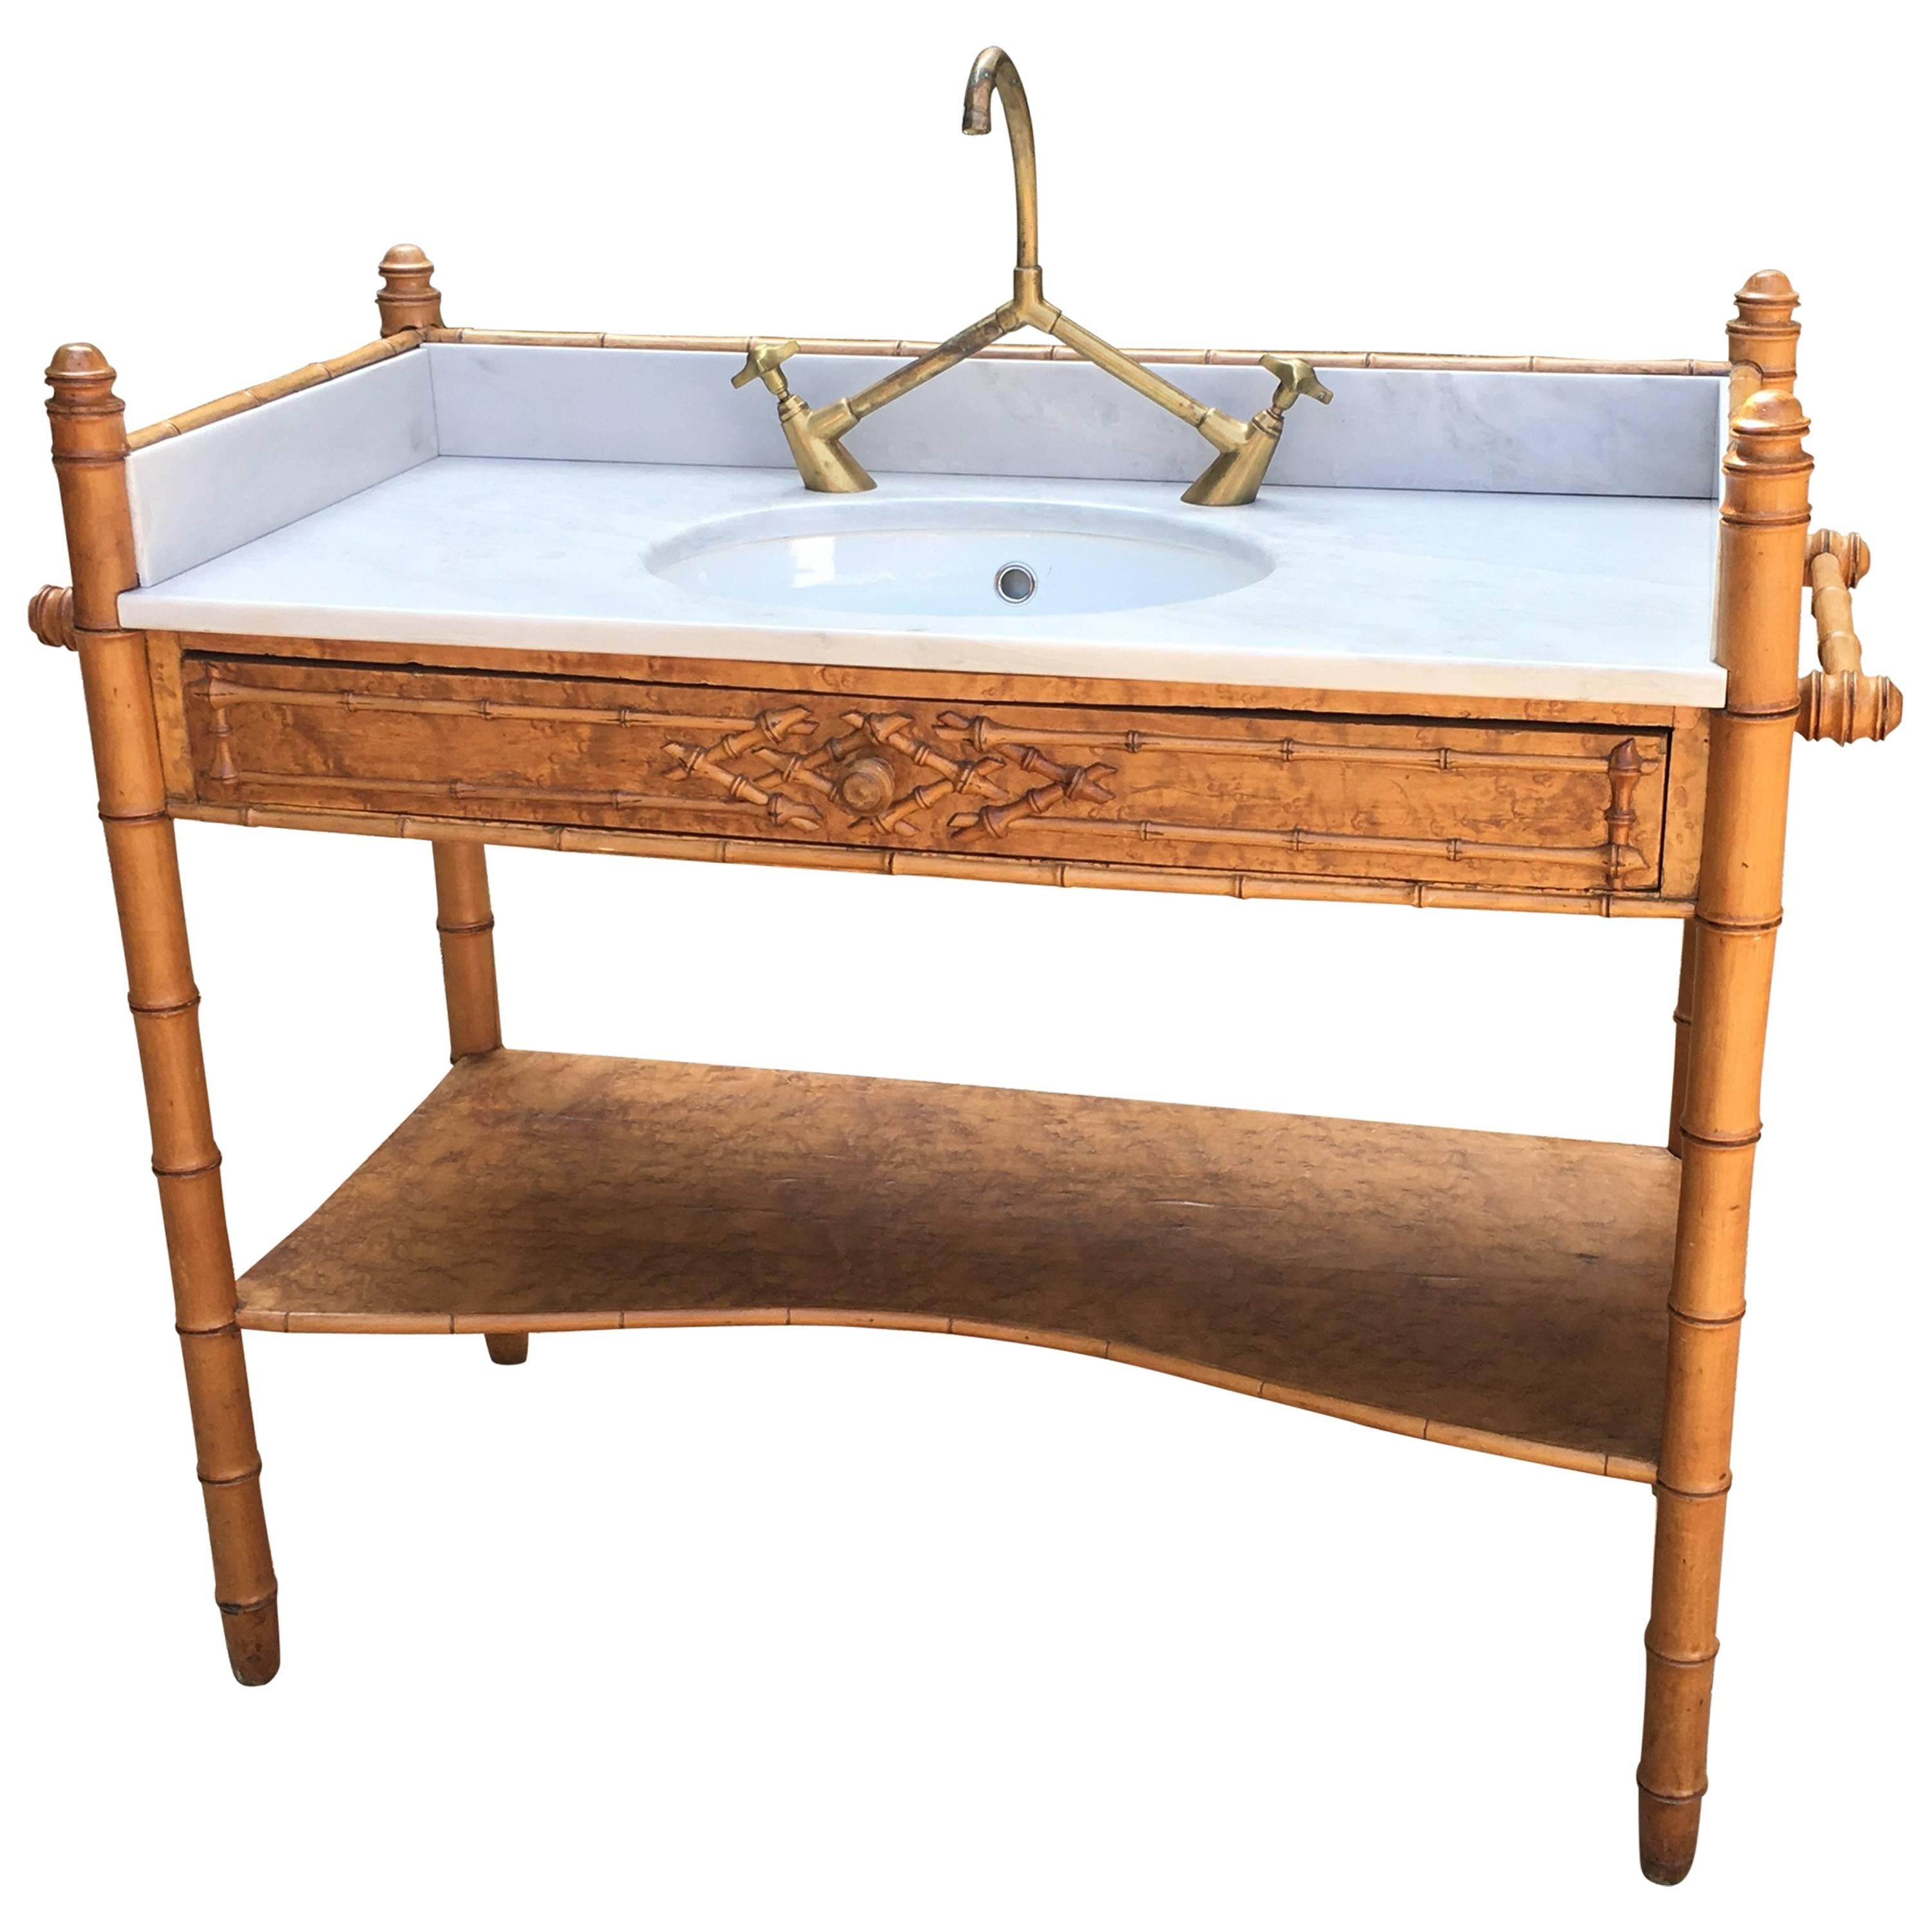 French Faux Bamboo with Marble Top Sink and Brass Faucet from 19th Century